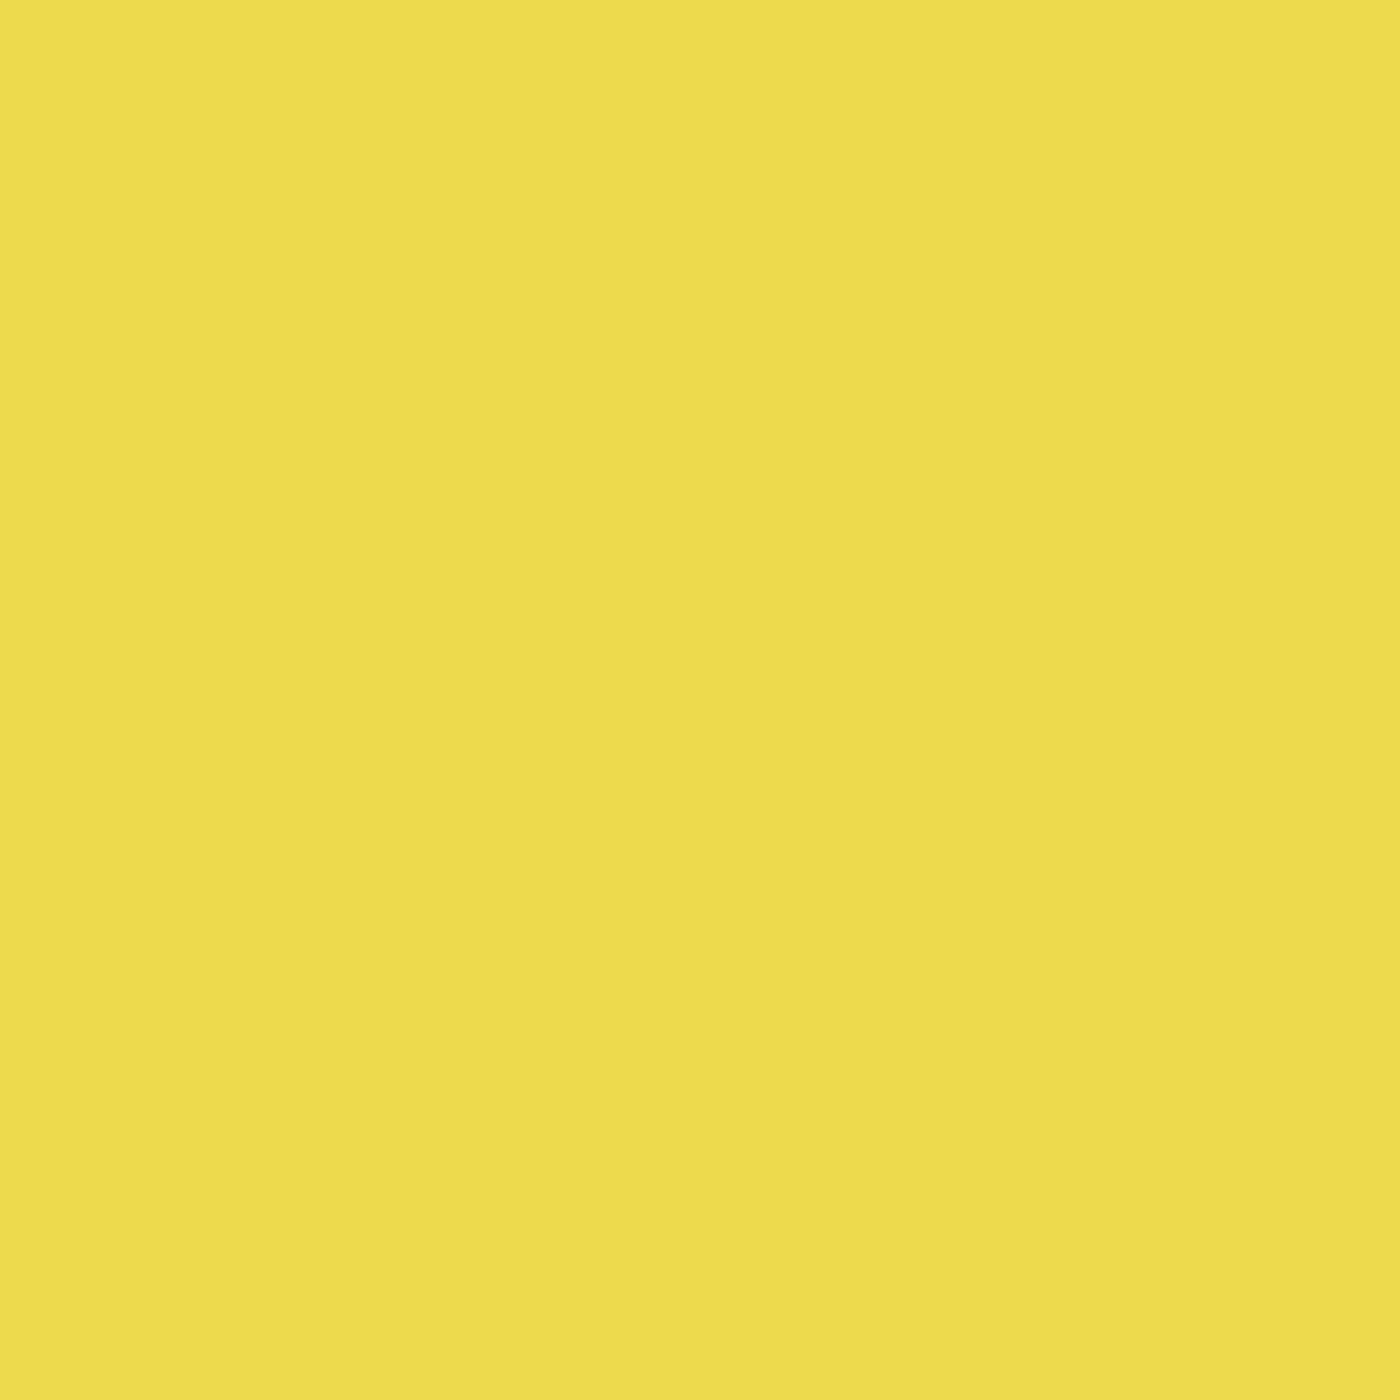 STARFRUIT BLISS Smooth 12x12 Cardstock - Bazzill Smoothies Collection - bright yellow